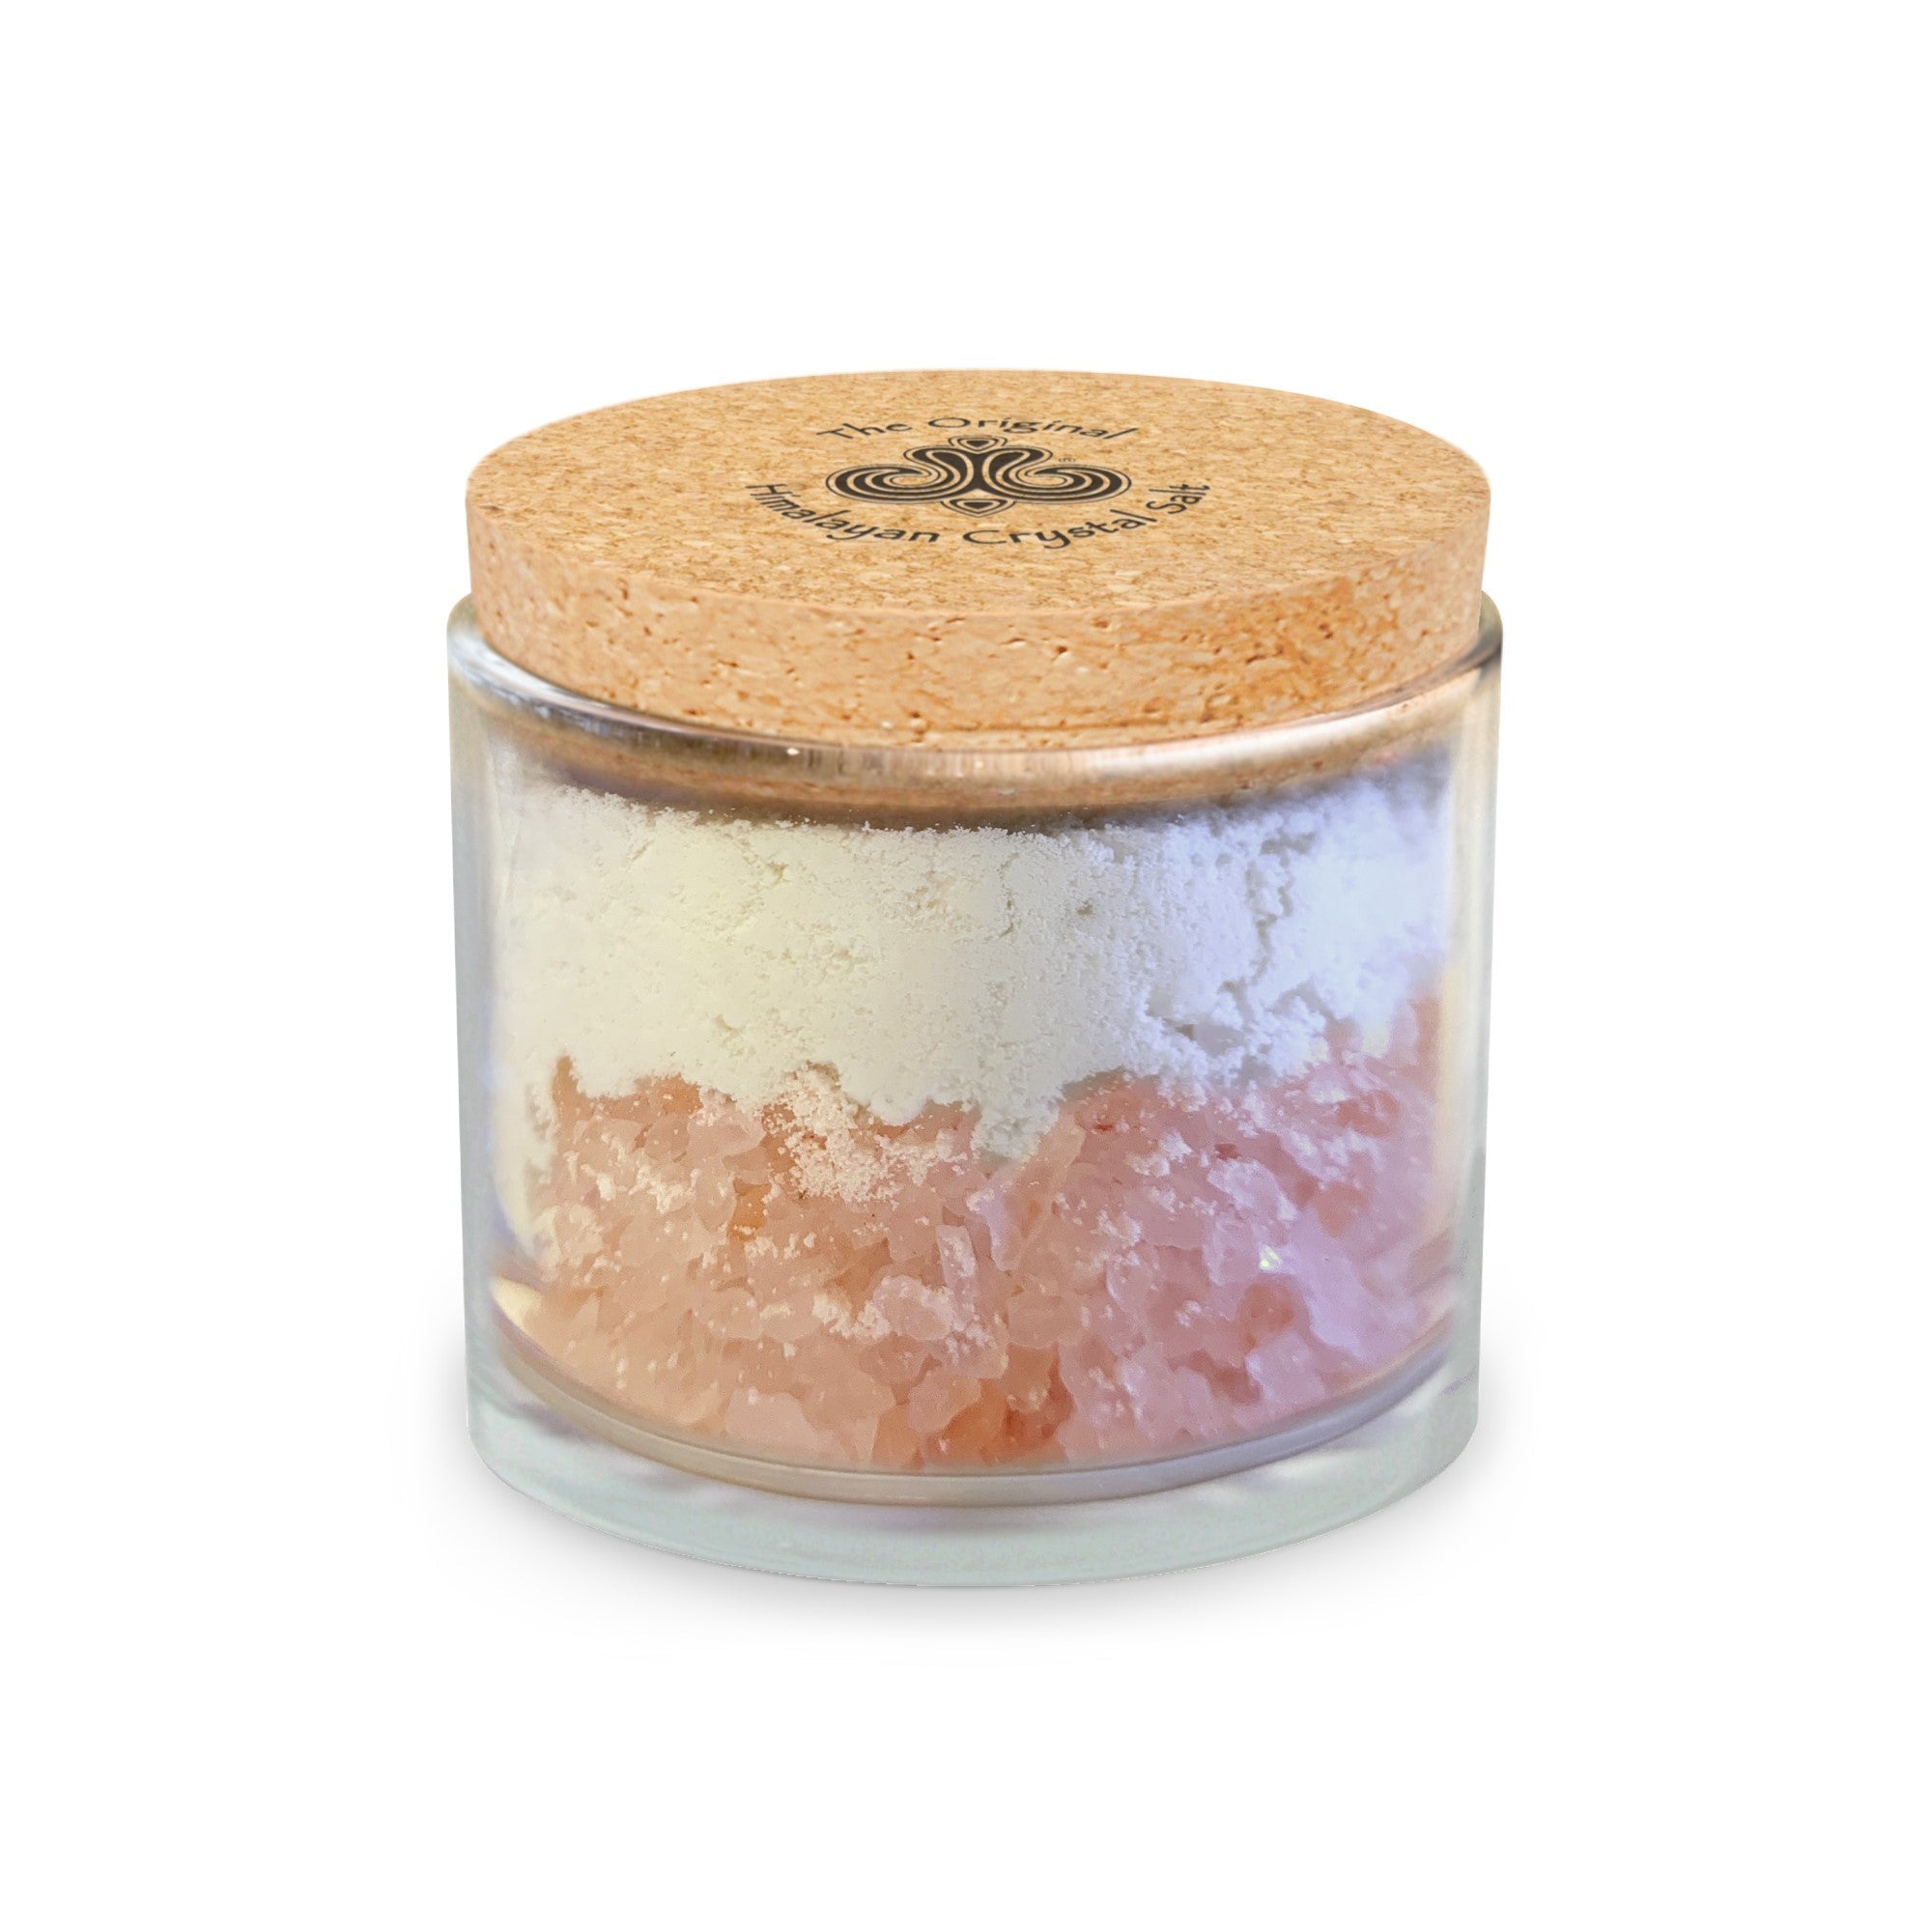 Coconut Soak product glass jar with cork top featuring Himalayan Crystal Salt logo, and filled with coconut milk and Himalayan Crystal Salt on white background